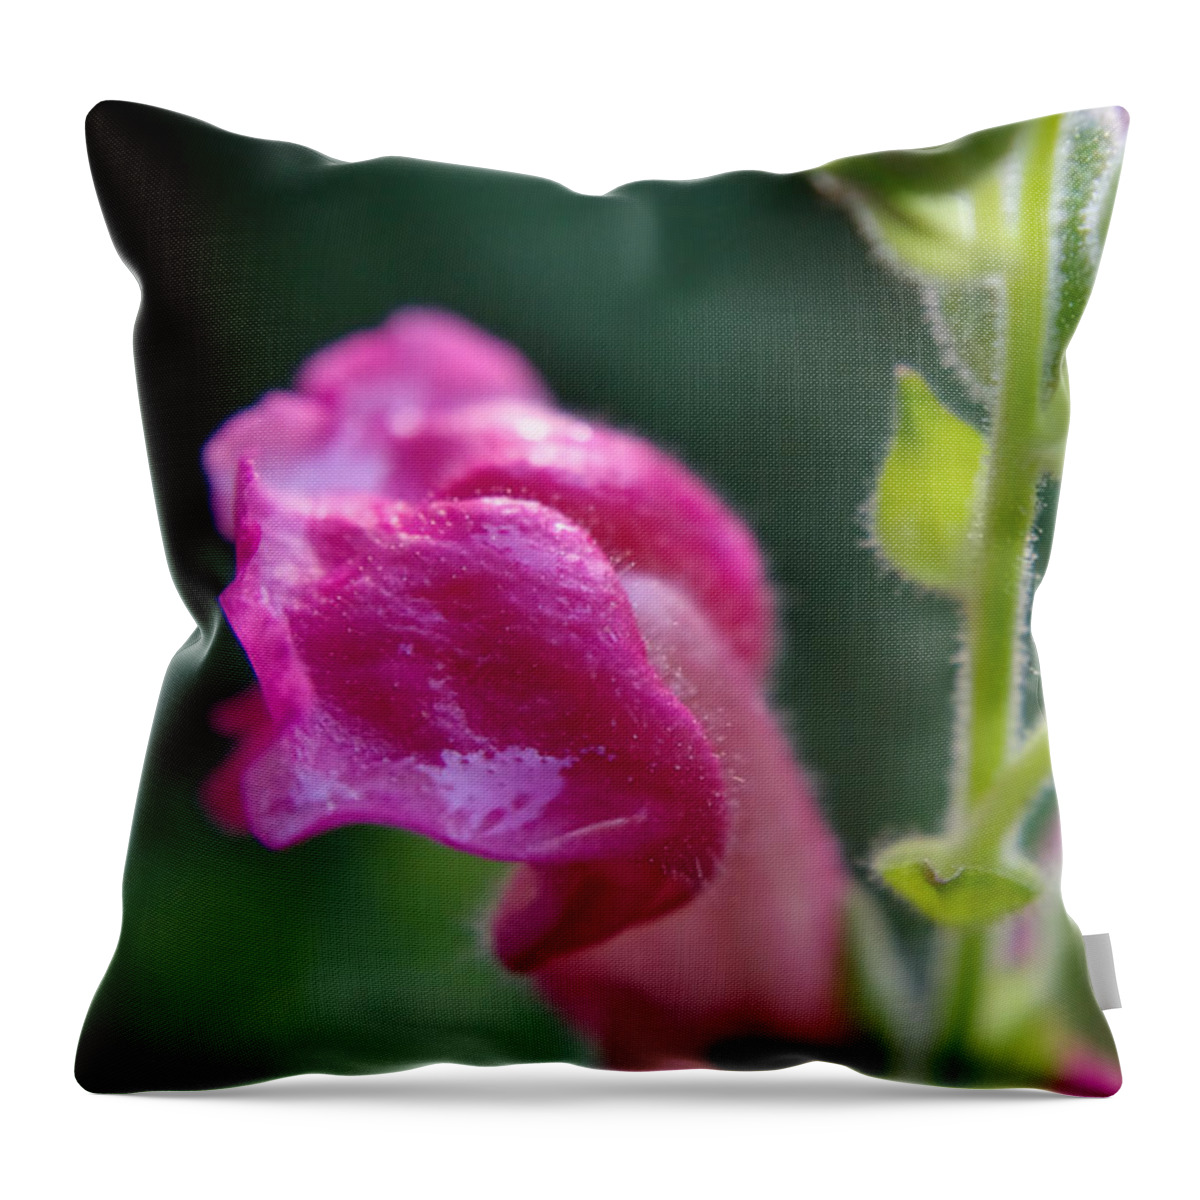 Adria Trail Throw Pillow featuring the photograph Snapdragon Hairs by Adria Trail